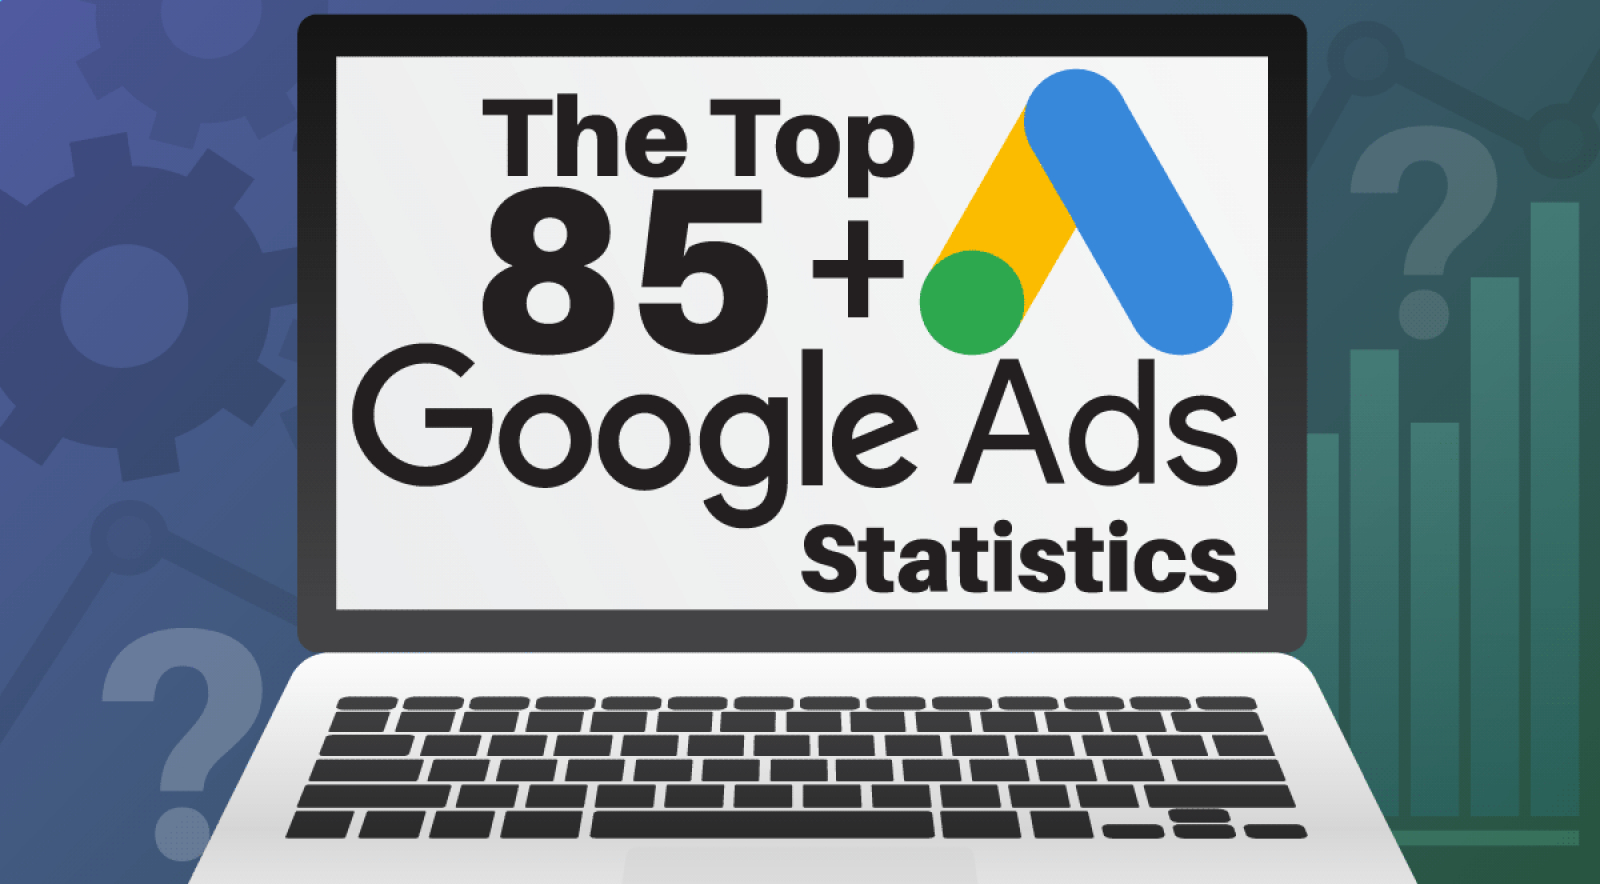 The Top 85+ Google Ads Statistics to Know in 2022 and Beyond